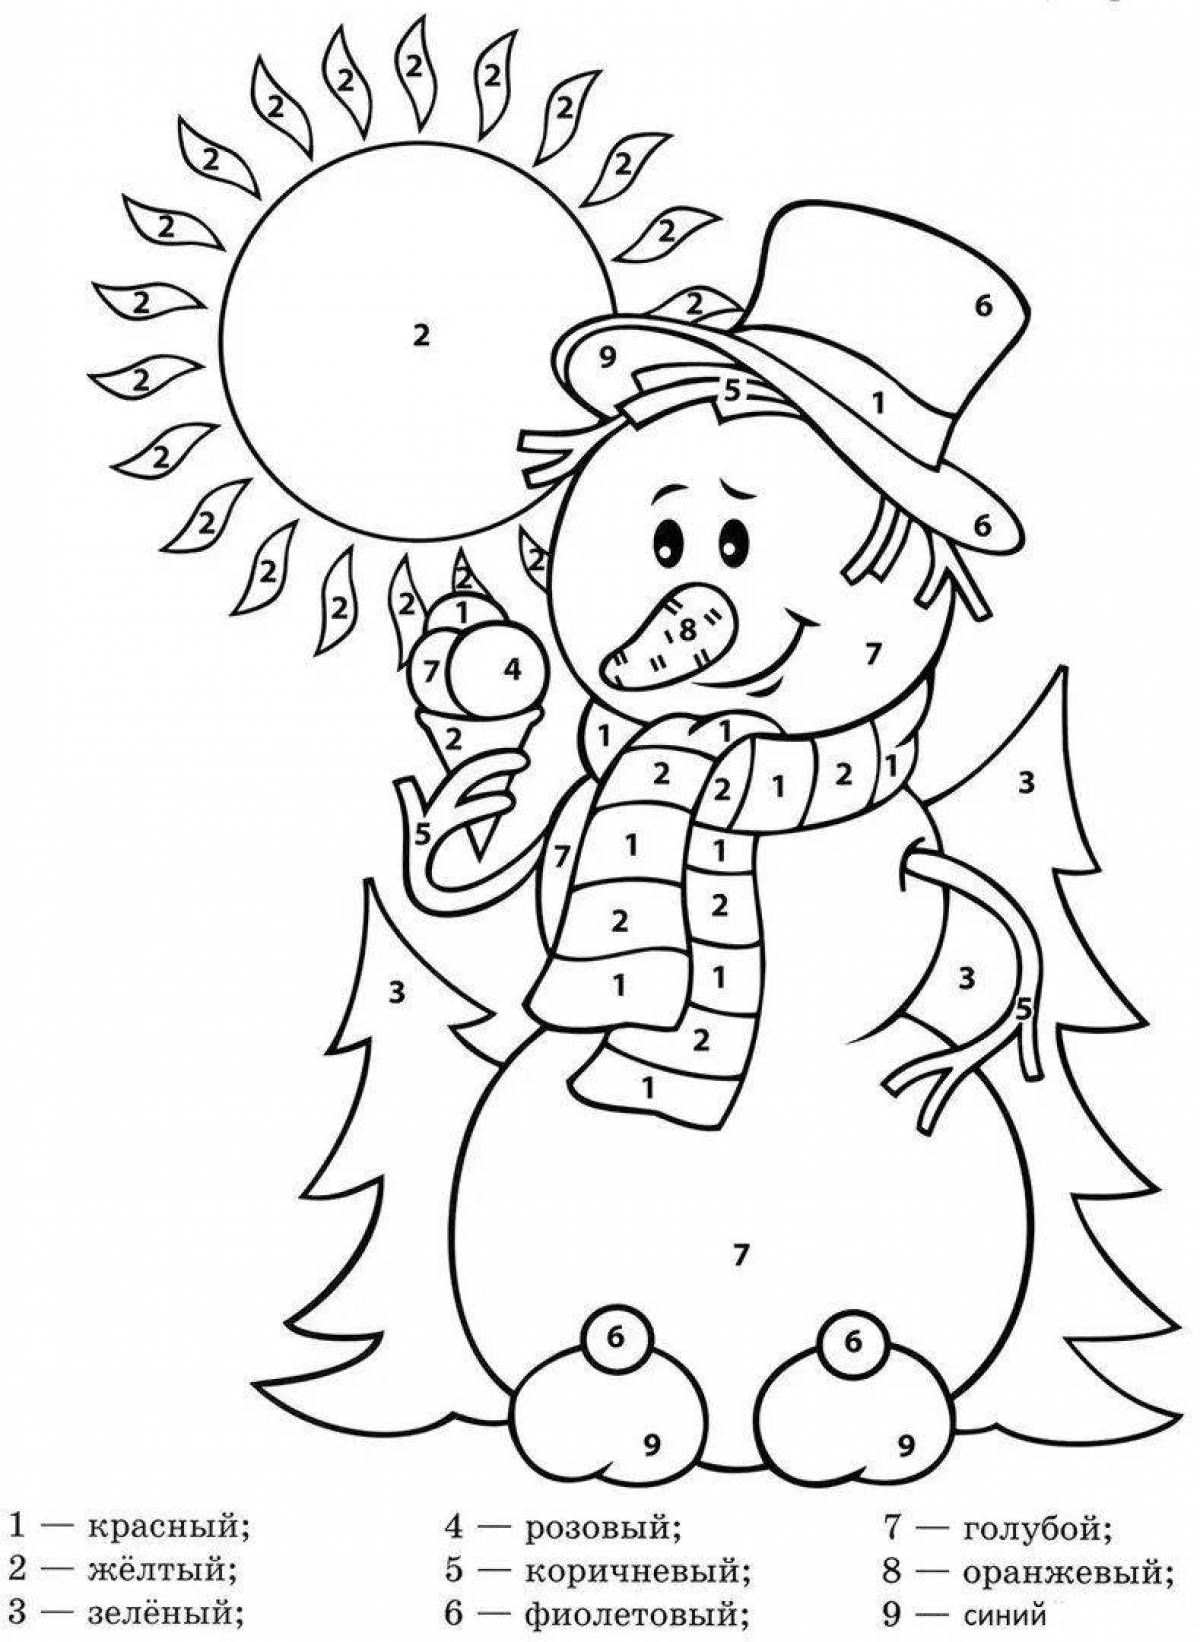 Serene coloring page by numbers winter for kids